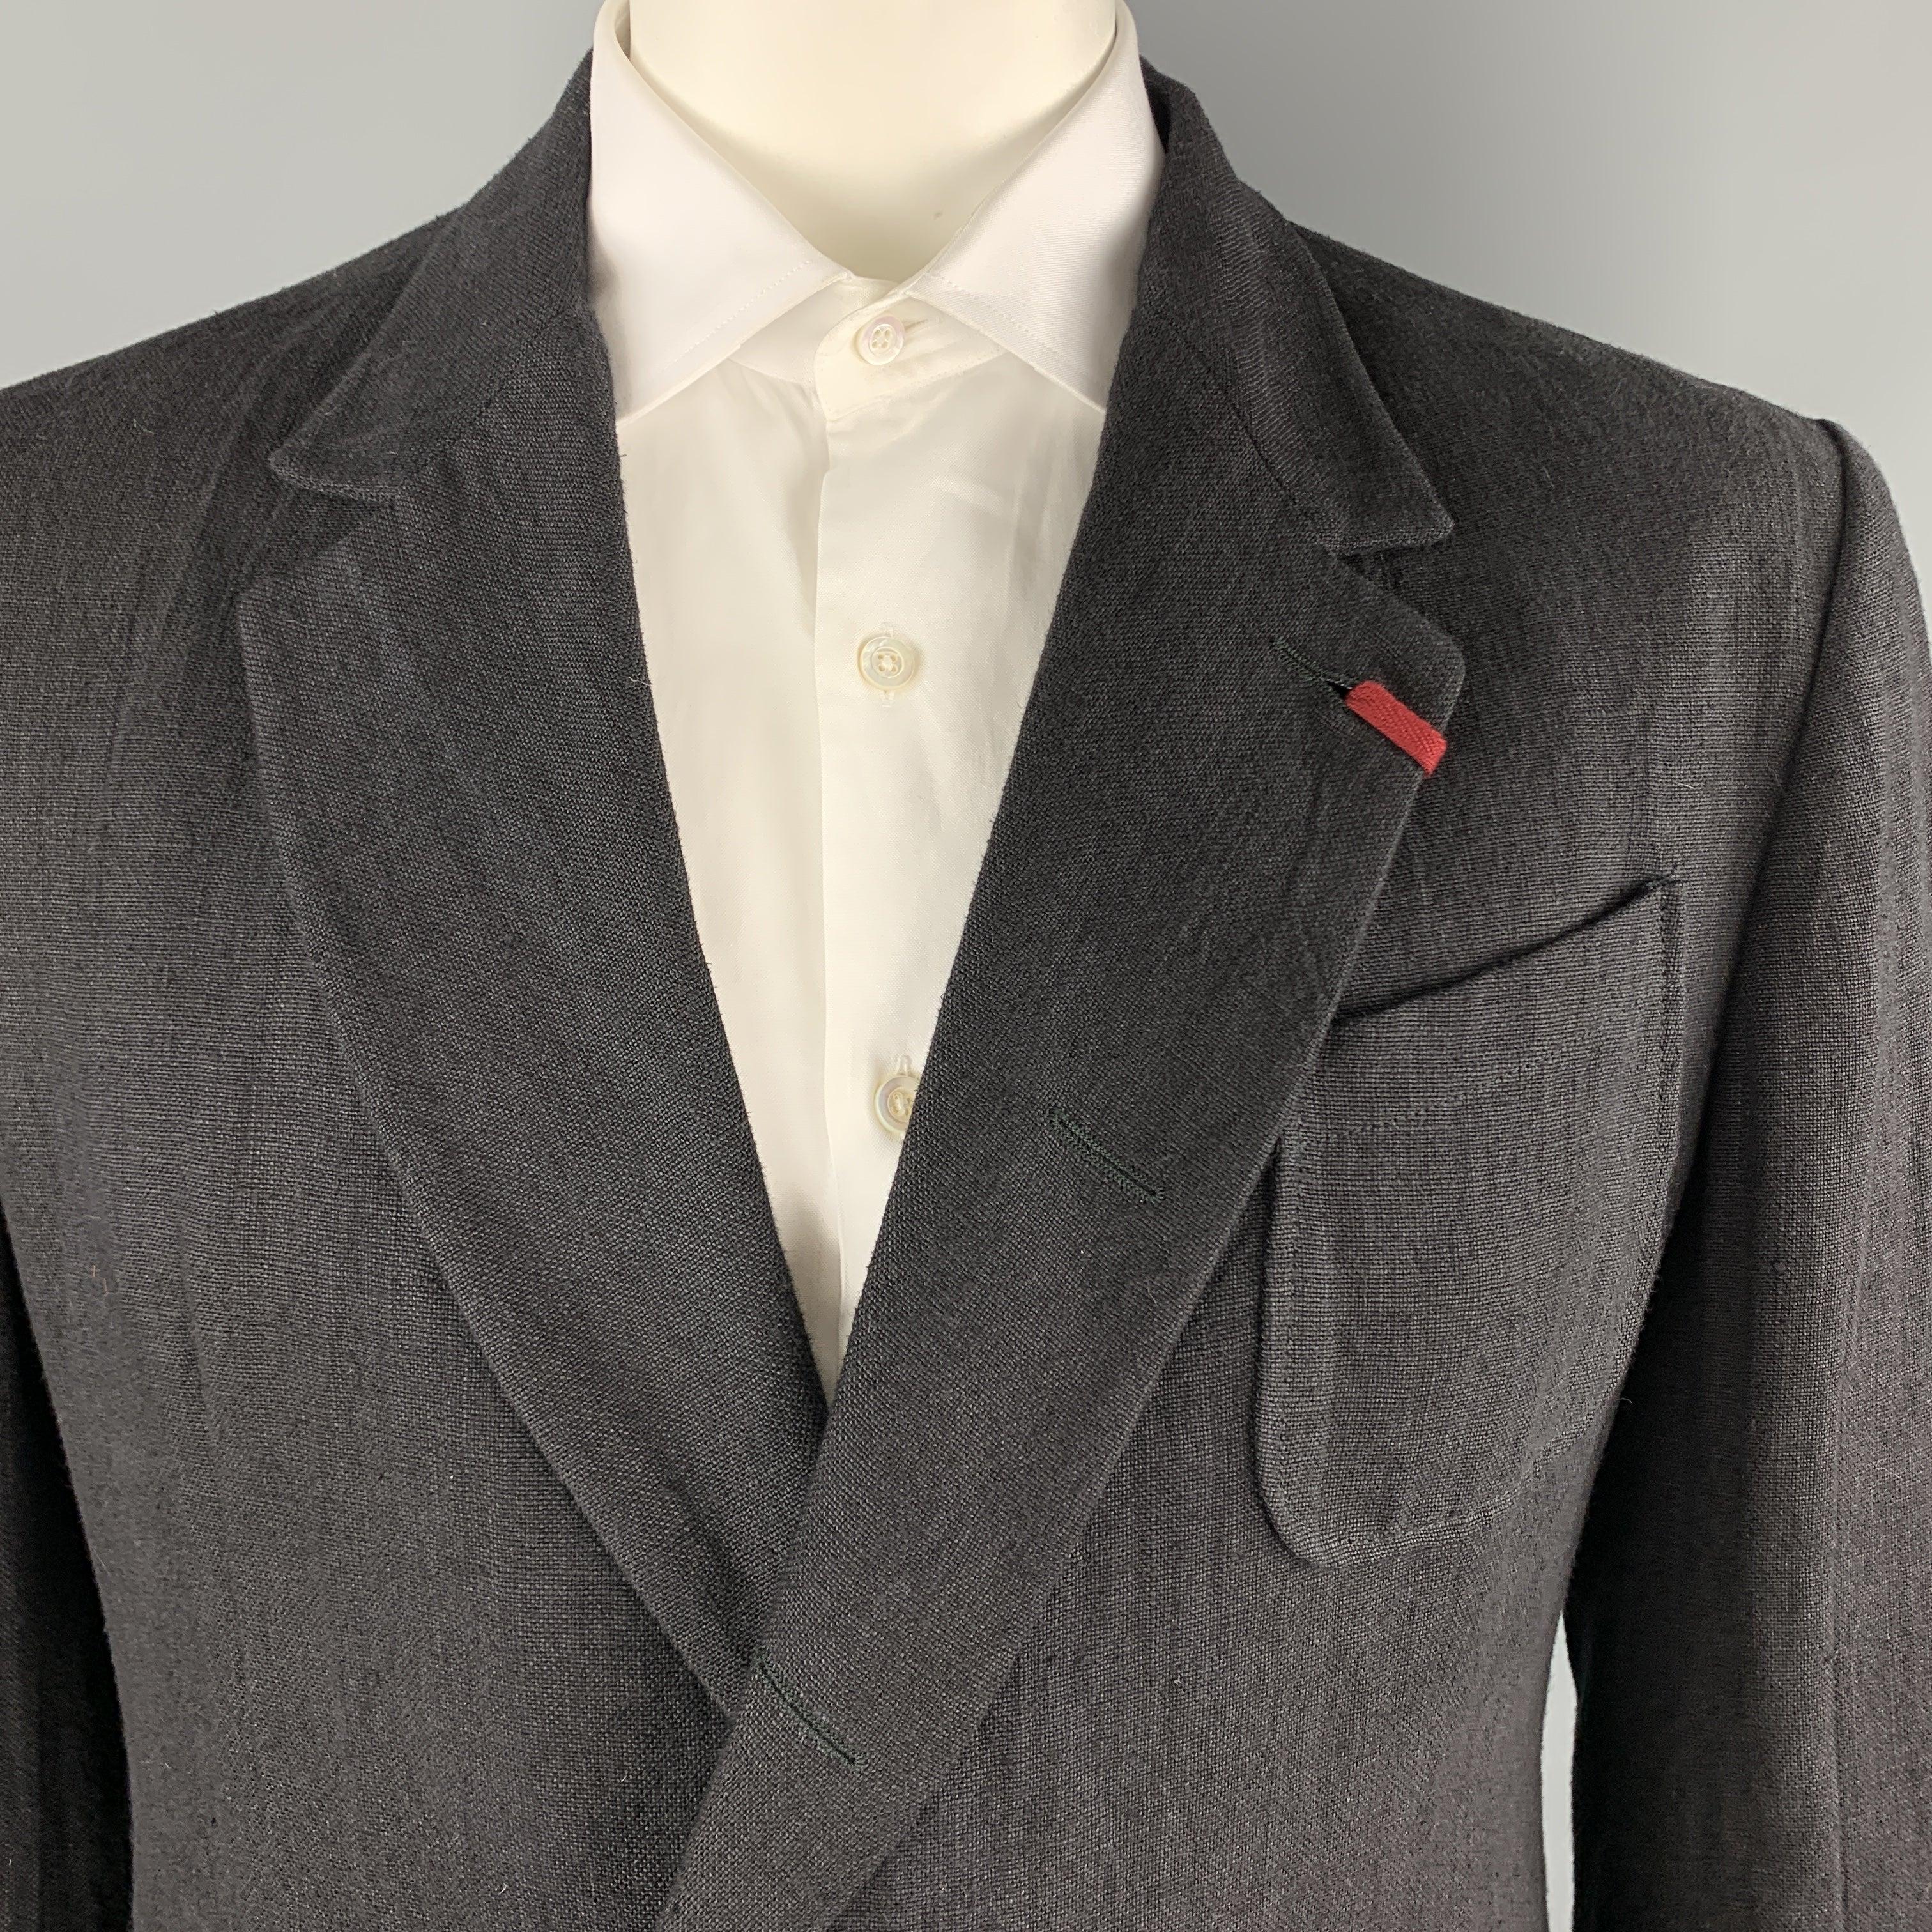 ALEXANDER MCQUEEN sport coat comes in black textured linen with a red tab detailed notch lapel, single breasted, hidden two button front, and 
functional button cuffs. Made in Italy.Excellent Pre-Owned Condition. 

Marked:   IT 52 

Measurements: 
